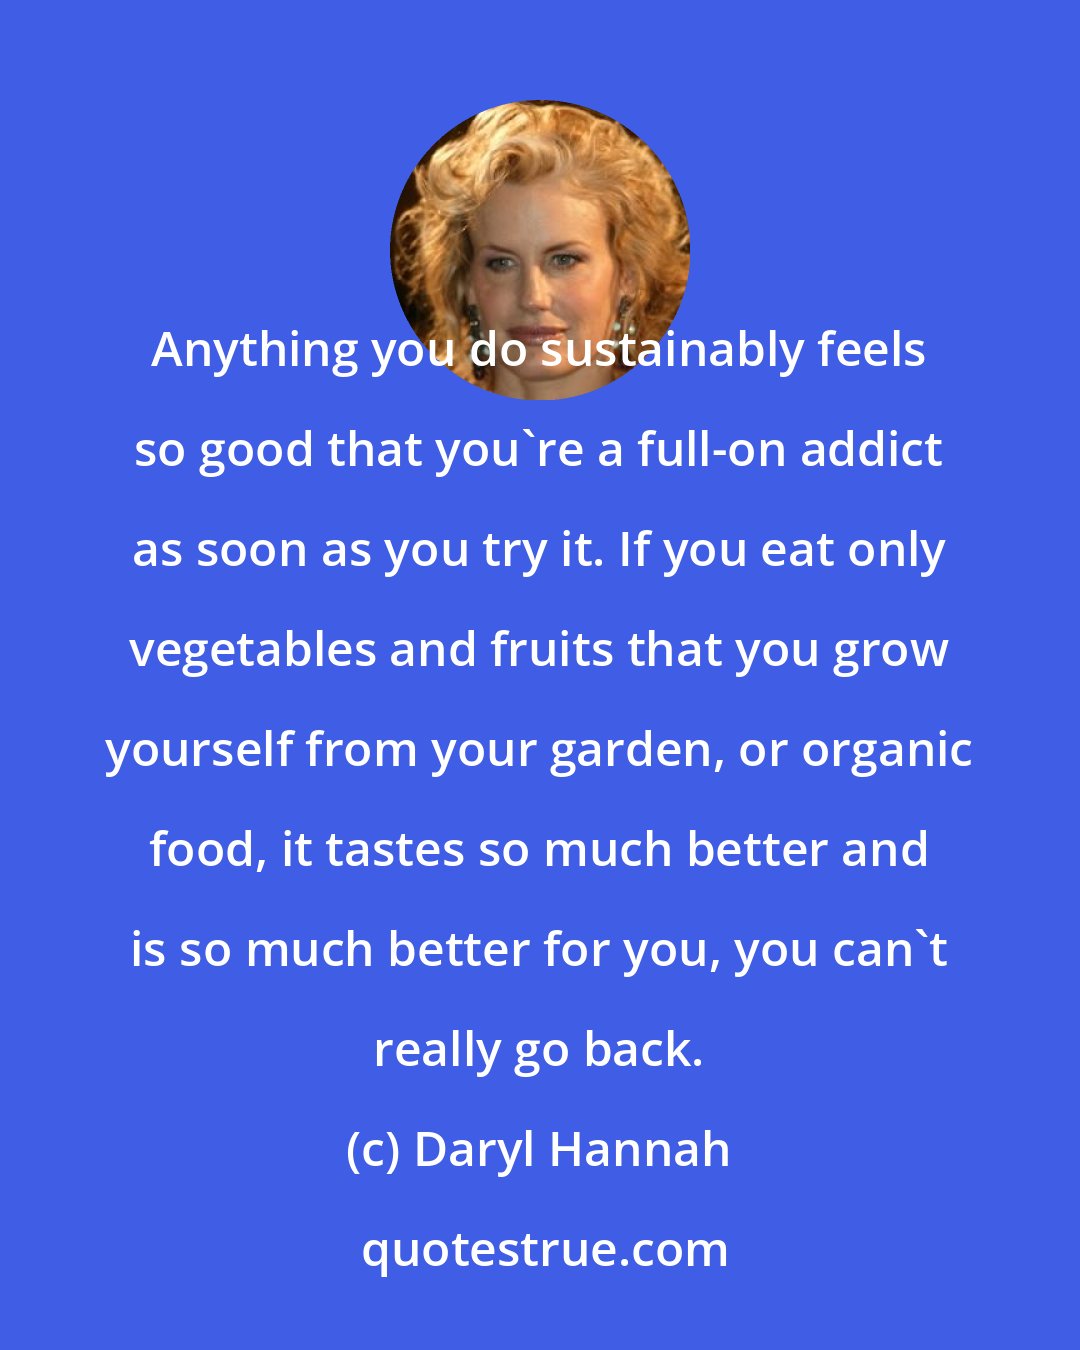 Daryl Hannah: Anything you do sustainably feels so good that you're a full-on addict as soon as you try it. If you eat only vegetables and fruits that you grow yourself from your garden, or organic food, it tastes so much better and is so much better for you, you can't really go back.